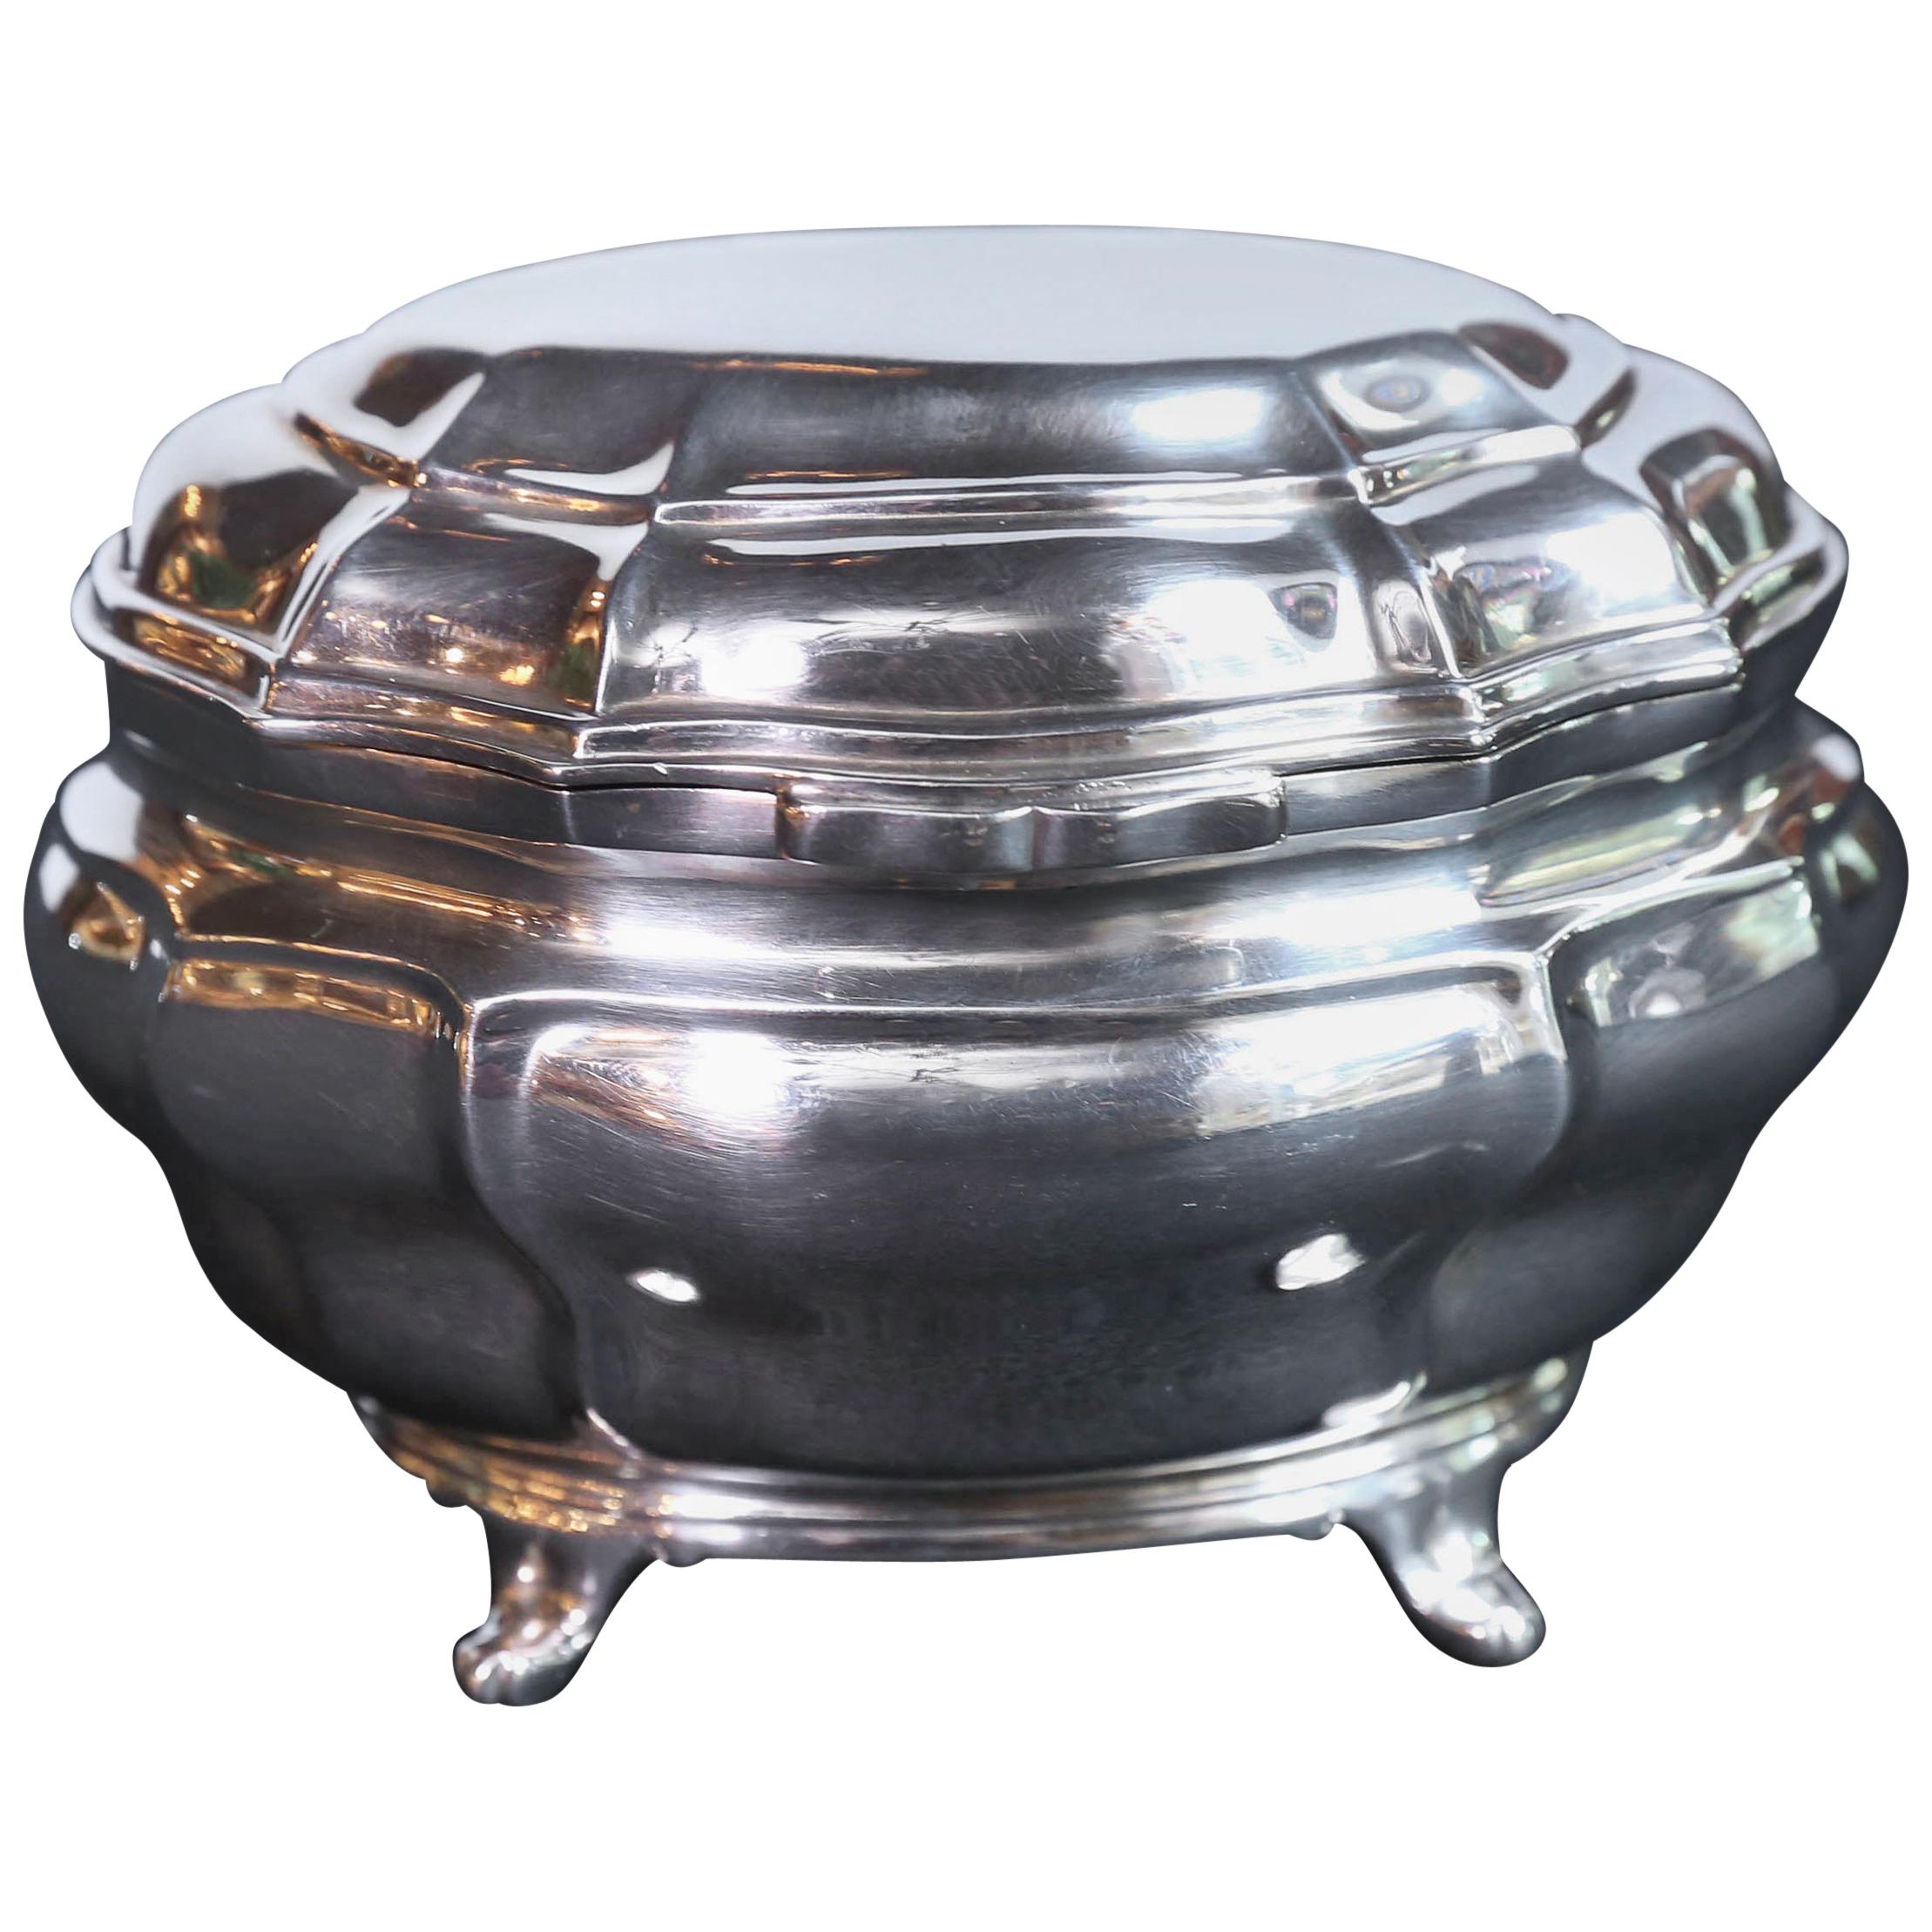 English Sterling Trinket Box of Ovoid Form, Opens with a Hinge Top, 19th Century